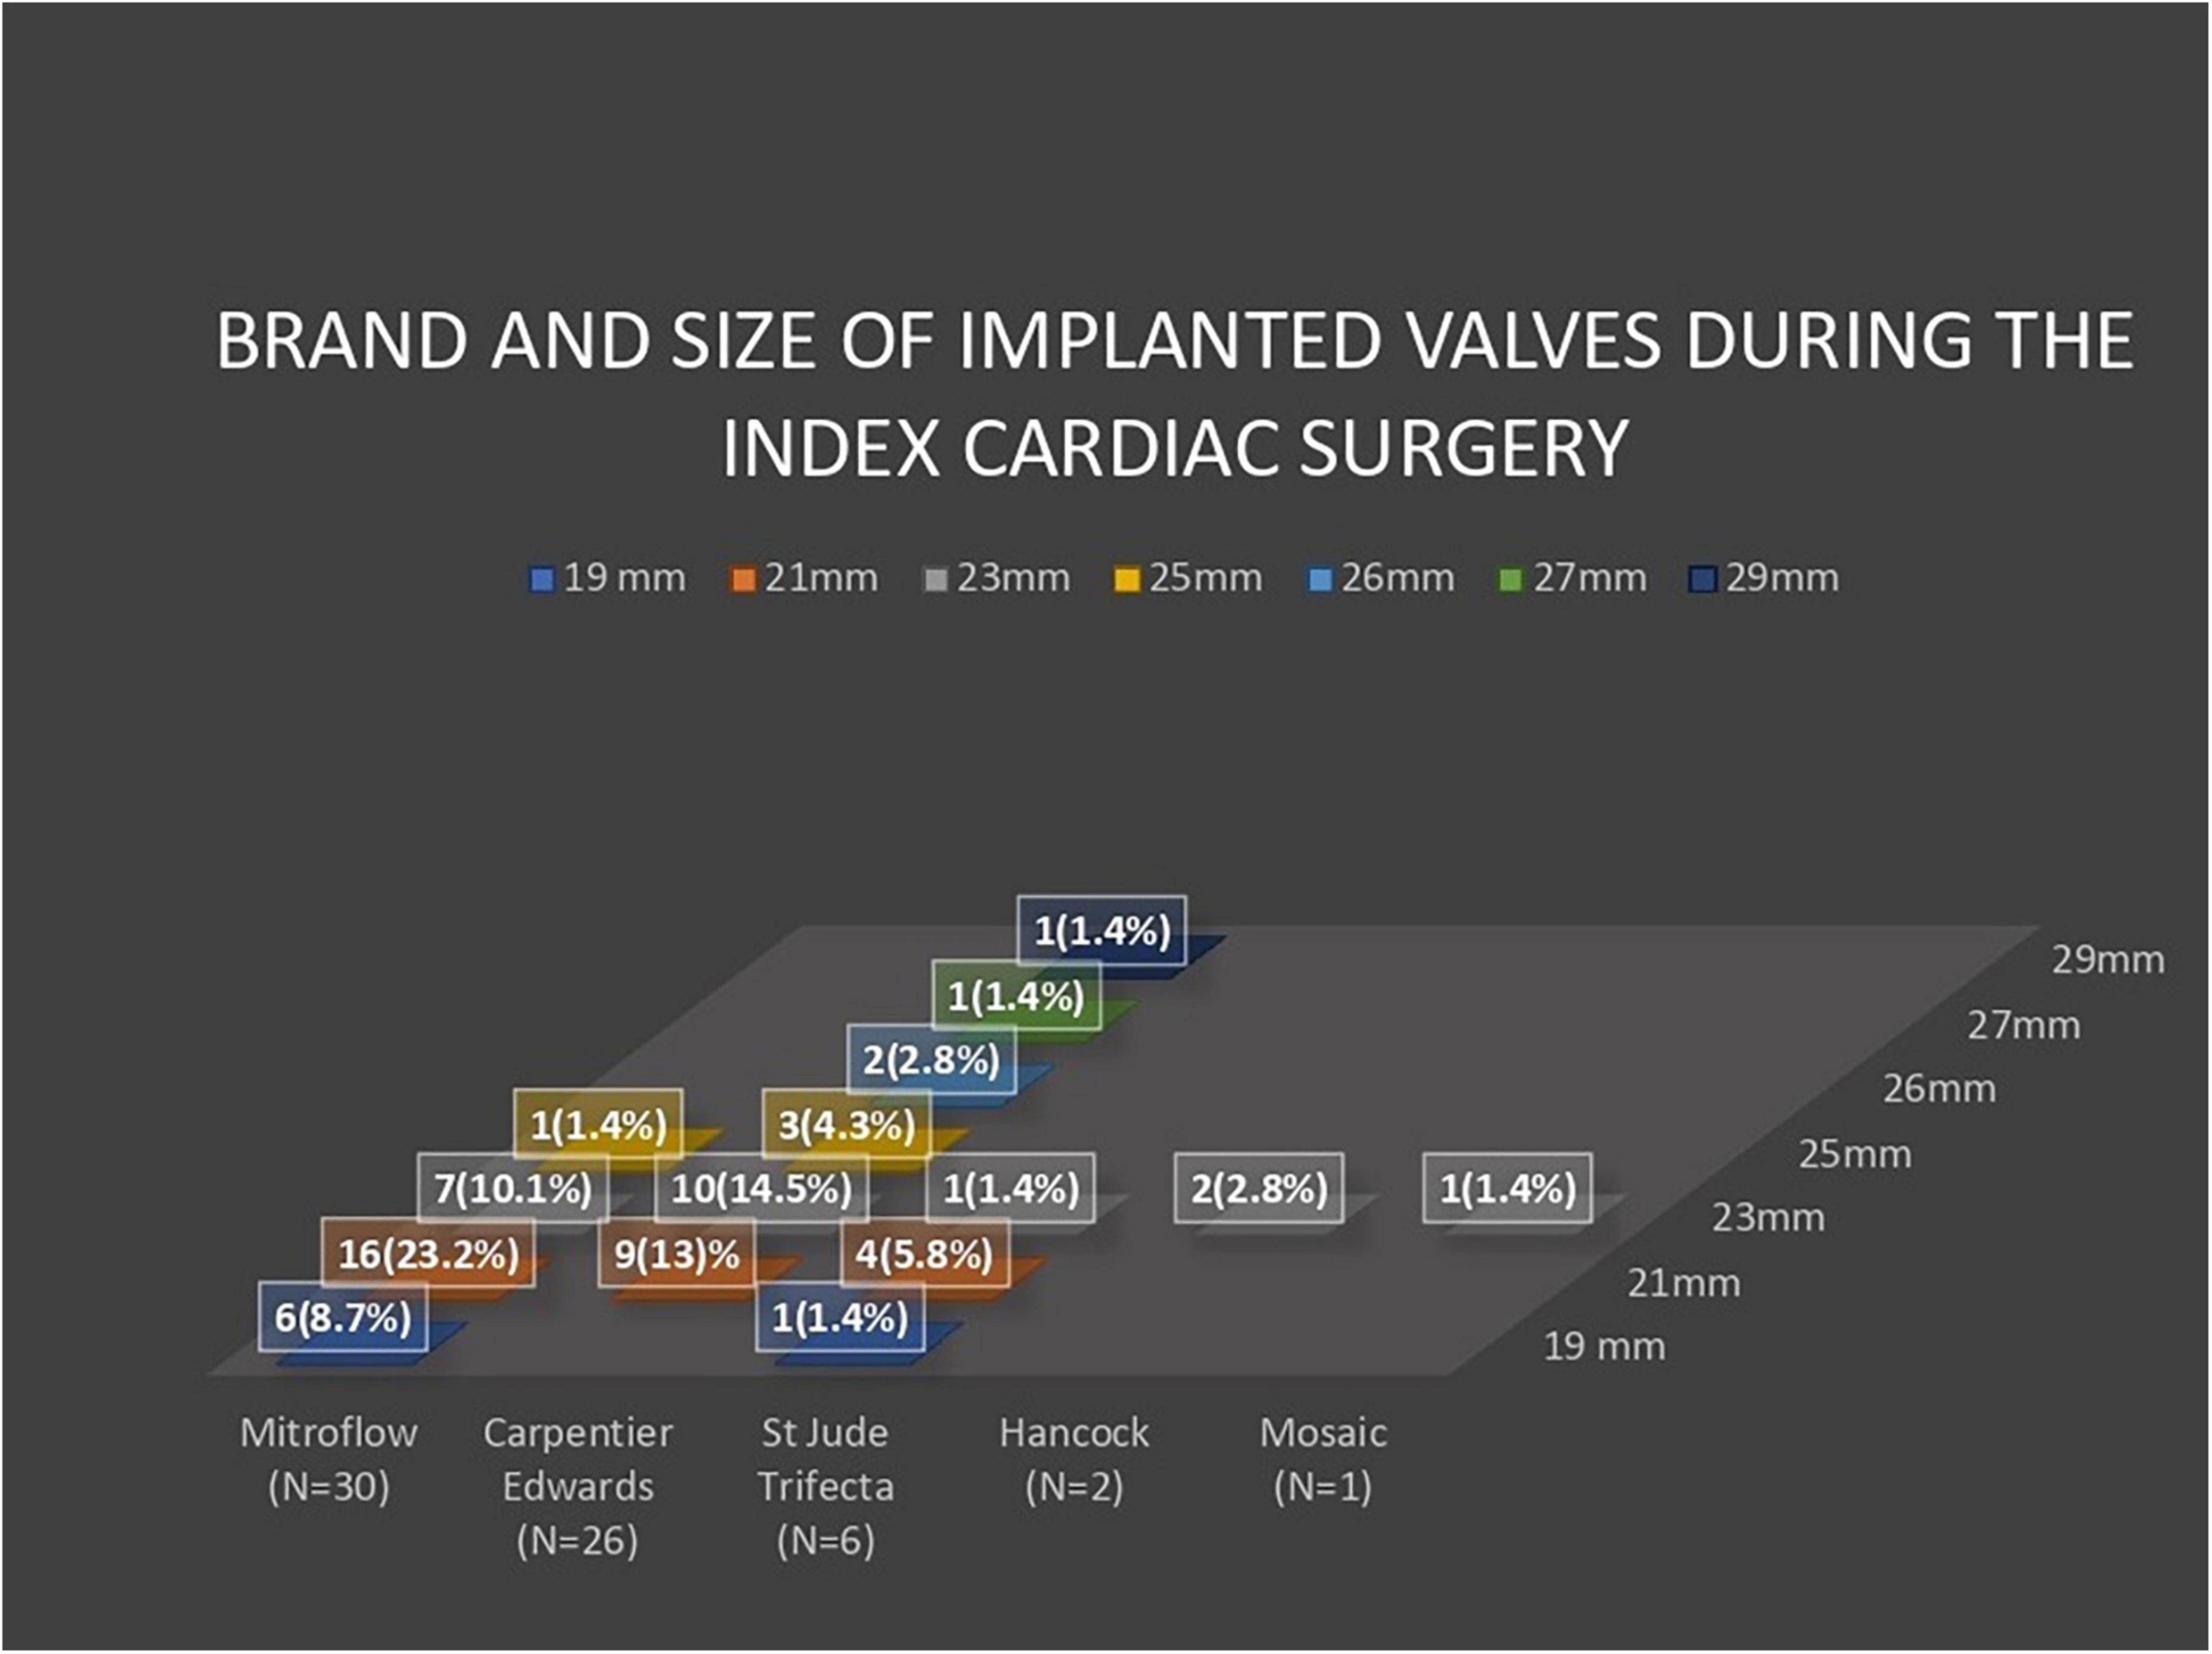 Comparison of in-hospital outcomes and long-term survival for valve-in-valve transcatheter aortic valve replacement versus the benchmark native valve transcatheter aortic valve replacement procedure